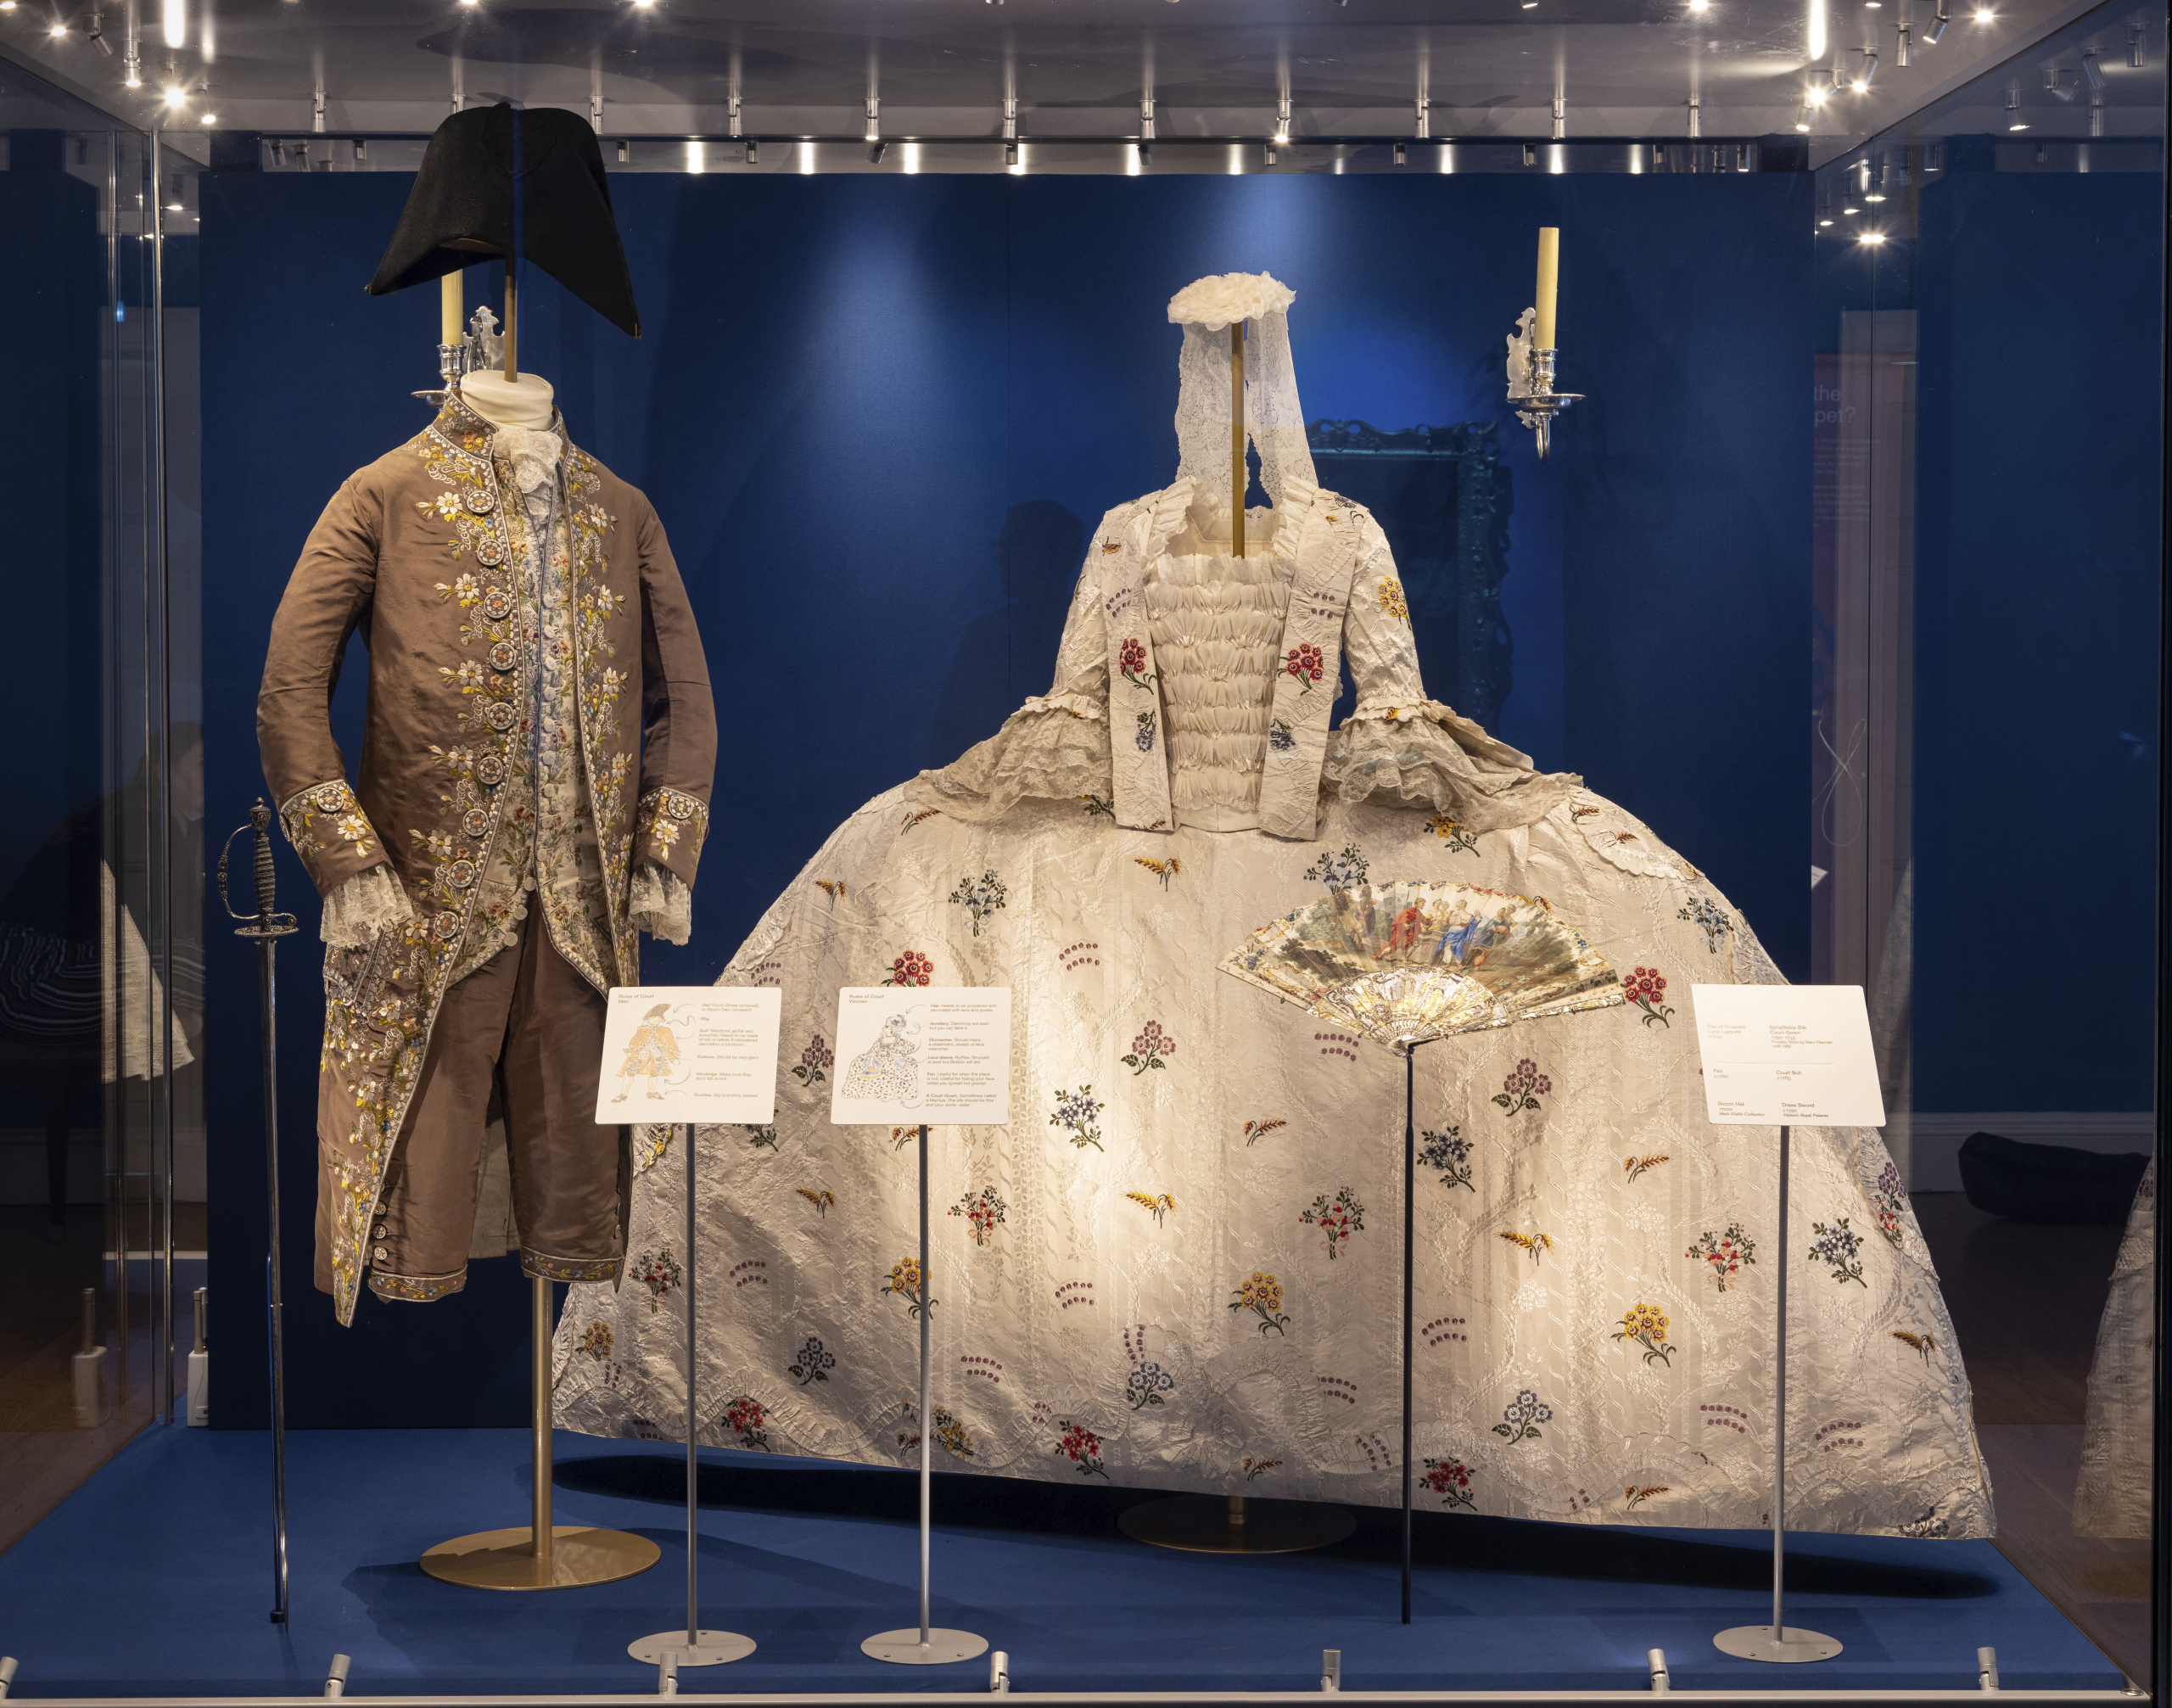 Elaborate Georgian outfits are also on display